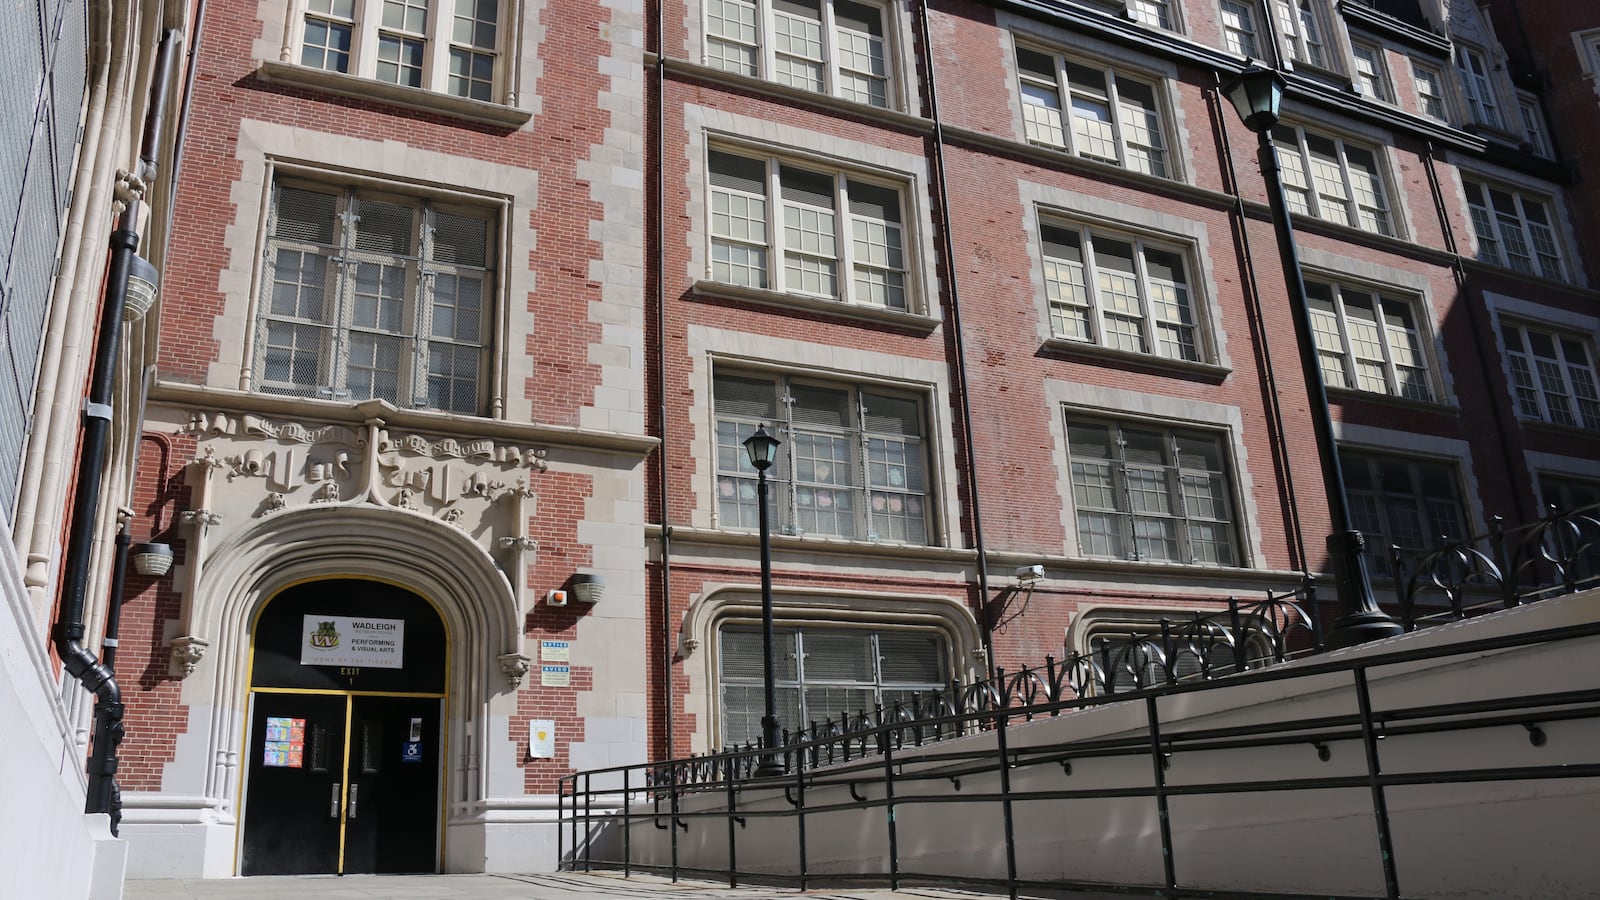 Middle schools in District 3, including Wadleigh Secondary School for the Performing Visual Arts, pictured above, are giving struggling students priority in admission.